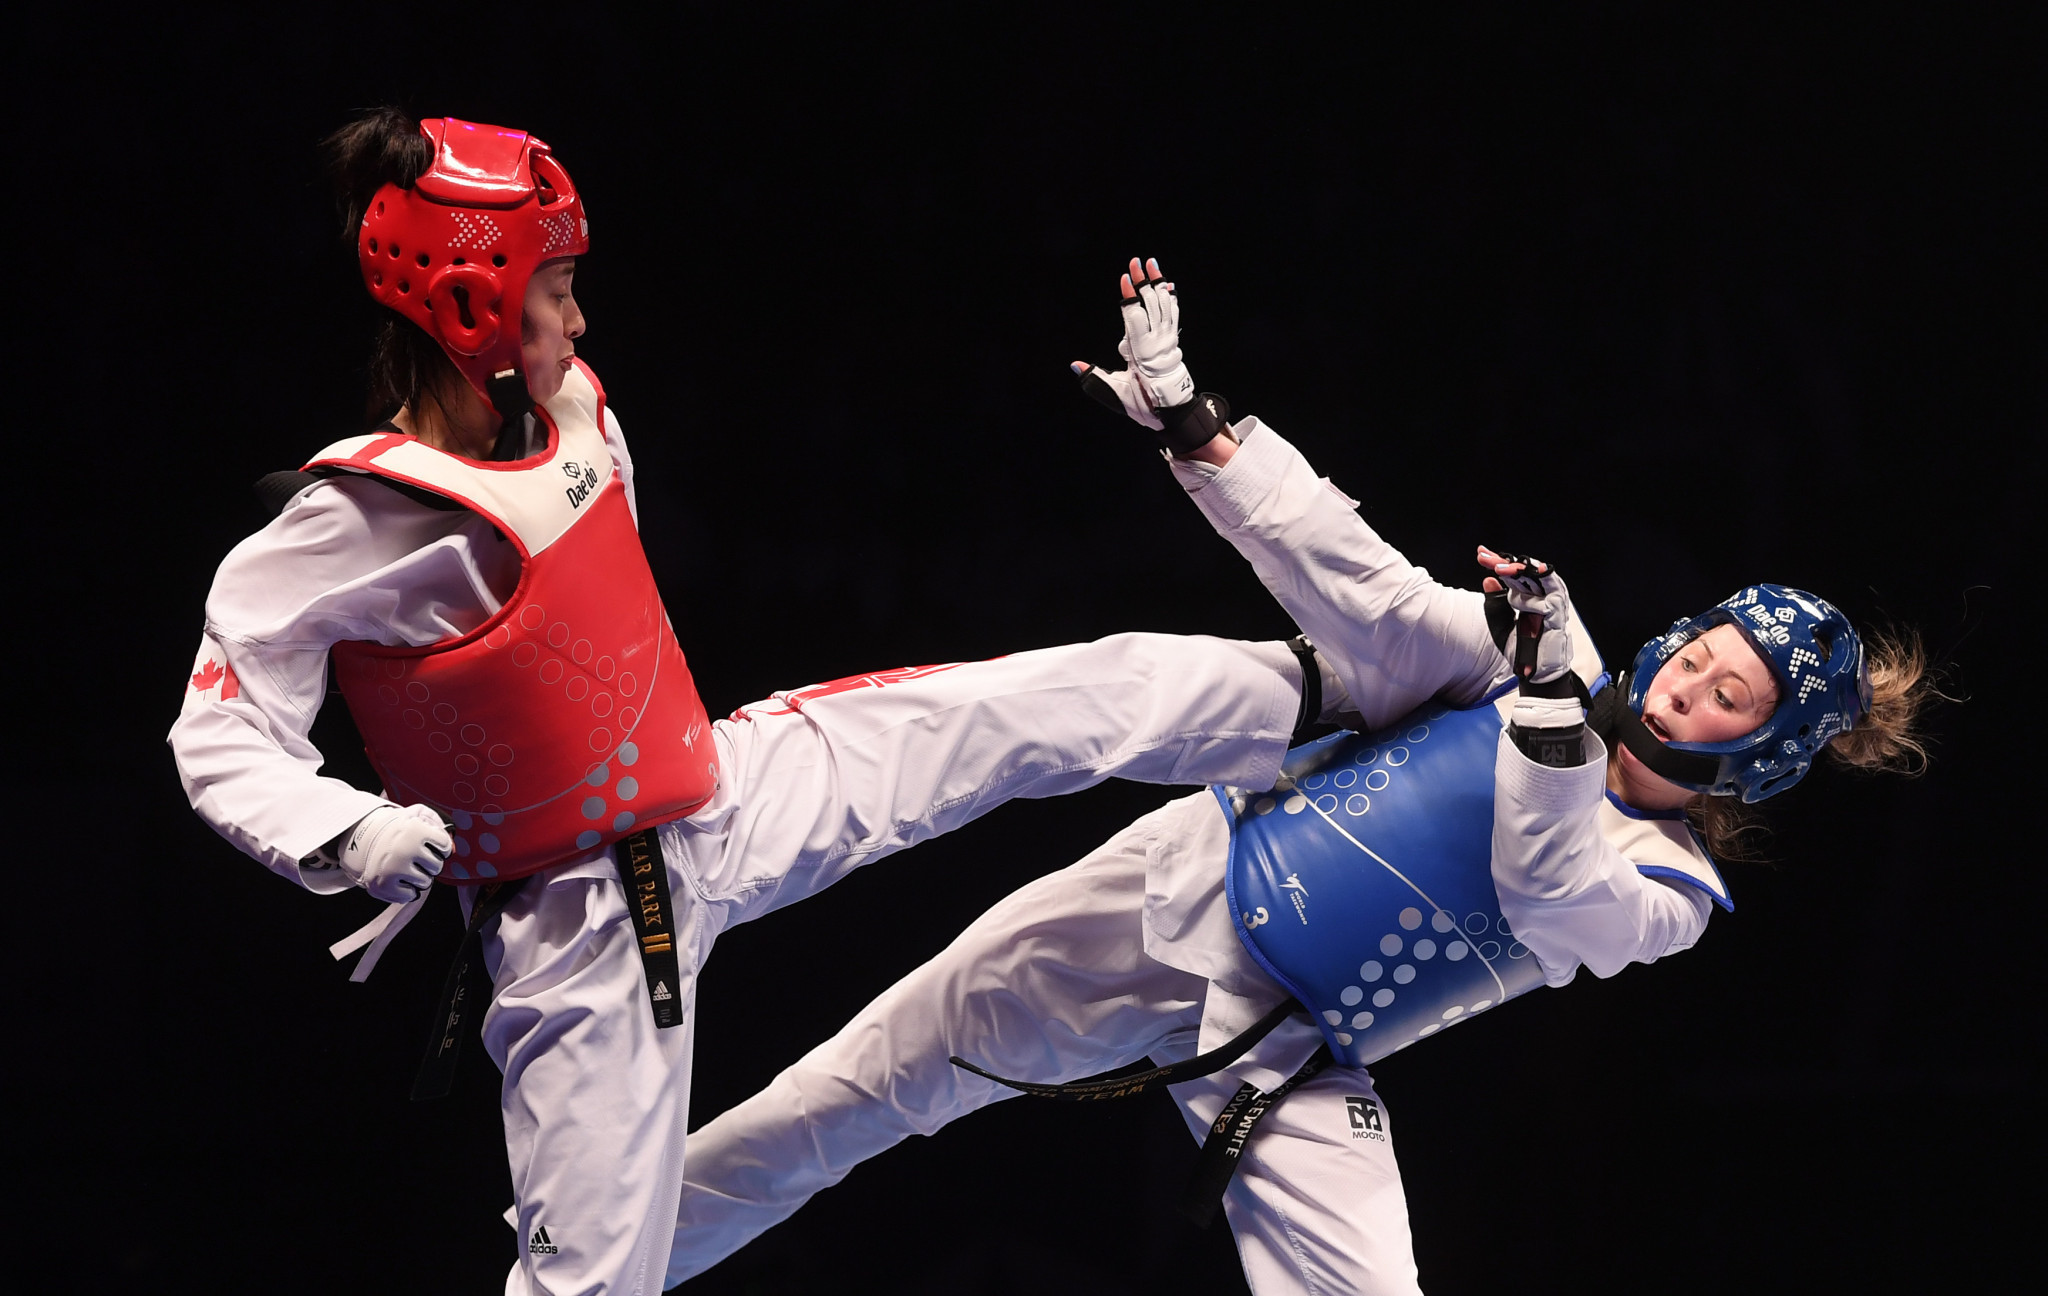 Skylar Park, left, the only Canadian taekwondo athlete qualified for the Tokyo 2020 Games, will receive a funding boost through the Murphy Family Awards ©Getty Images